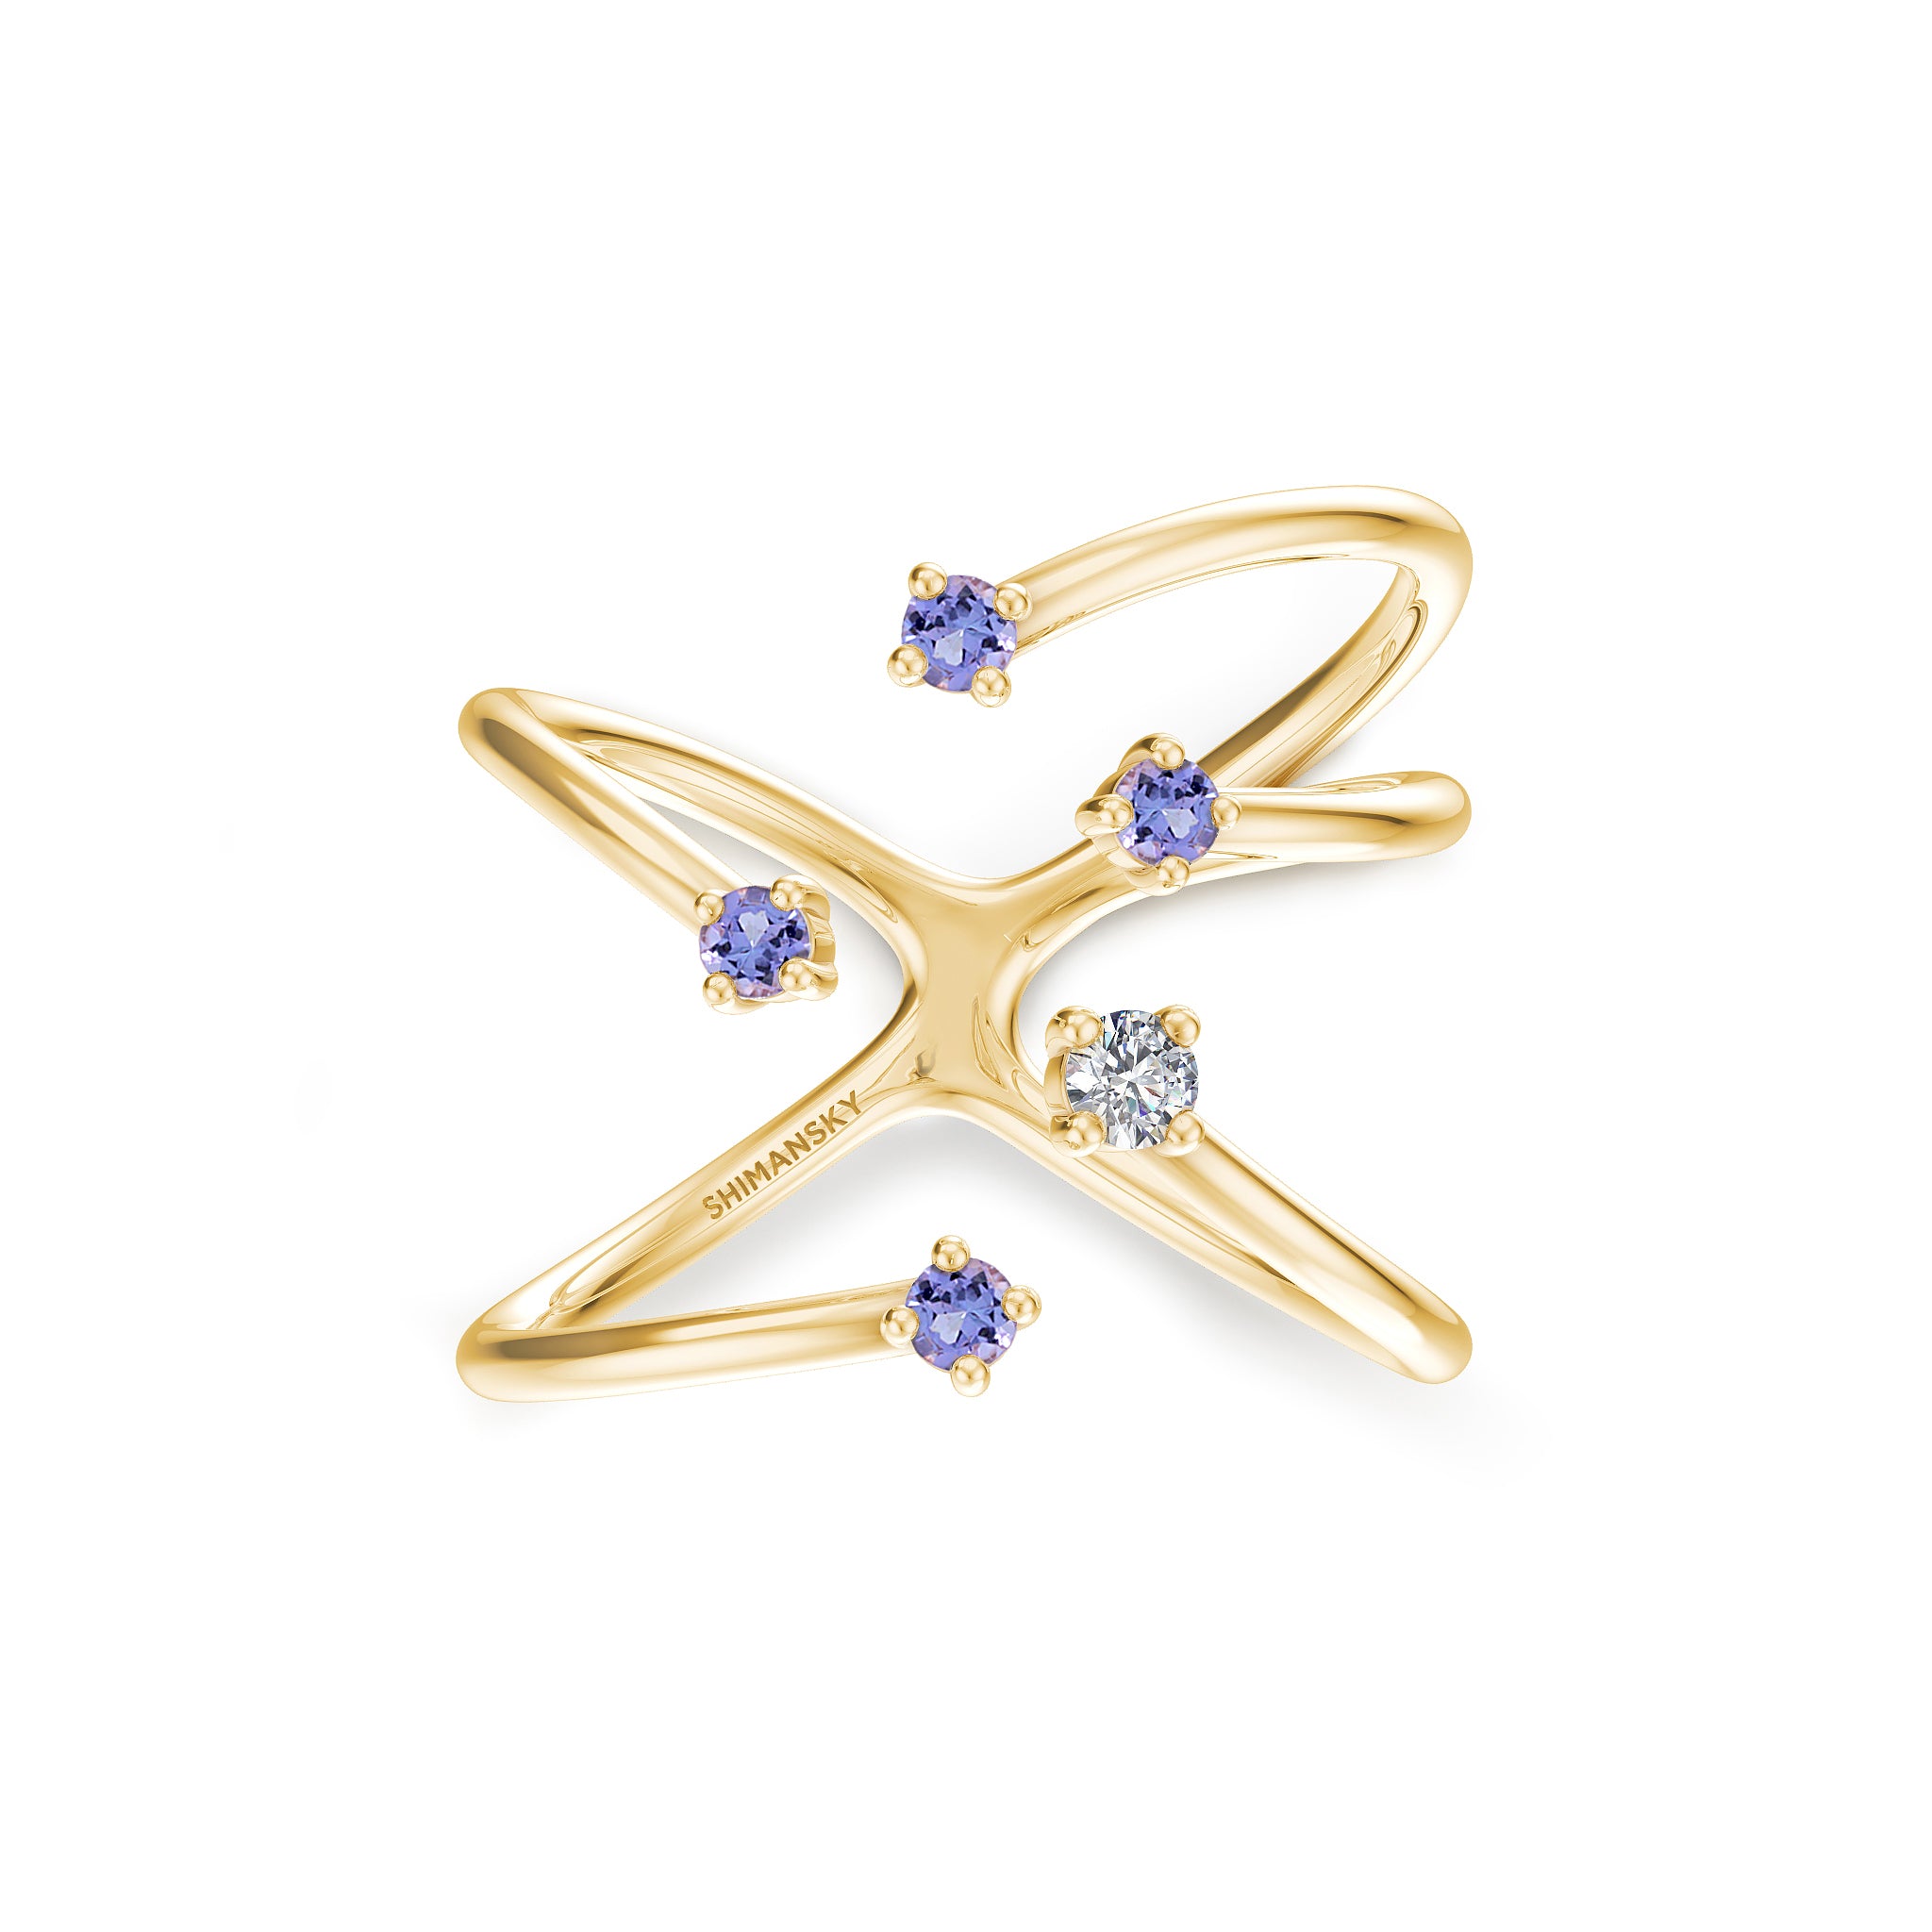 Shimansky - Southern Cross Diamond and Tanzanite Ring Crafted in 14K Yellow Gold